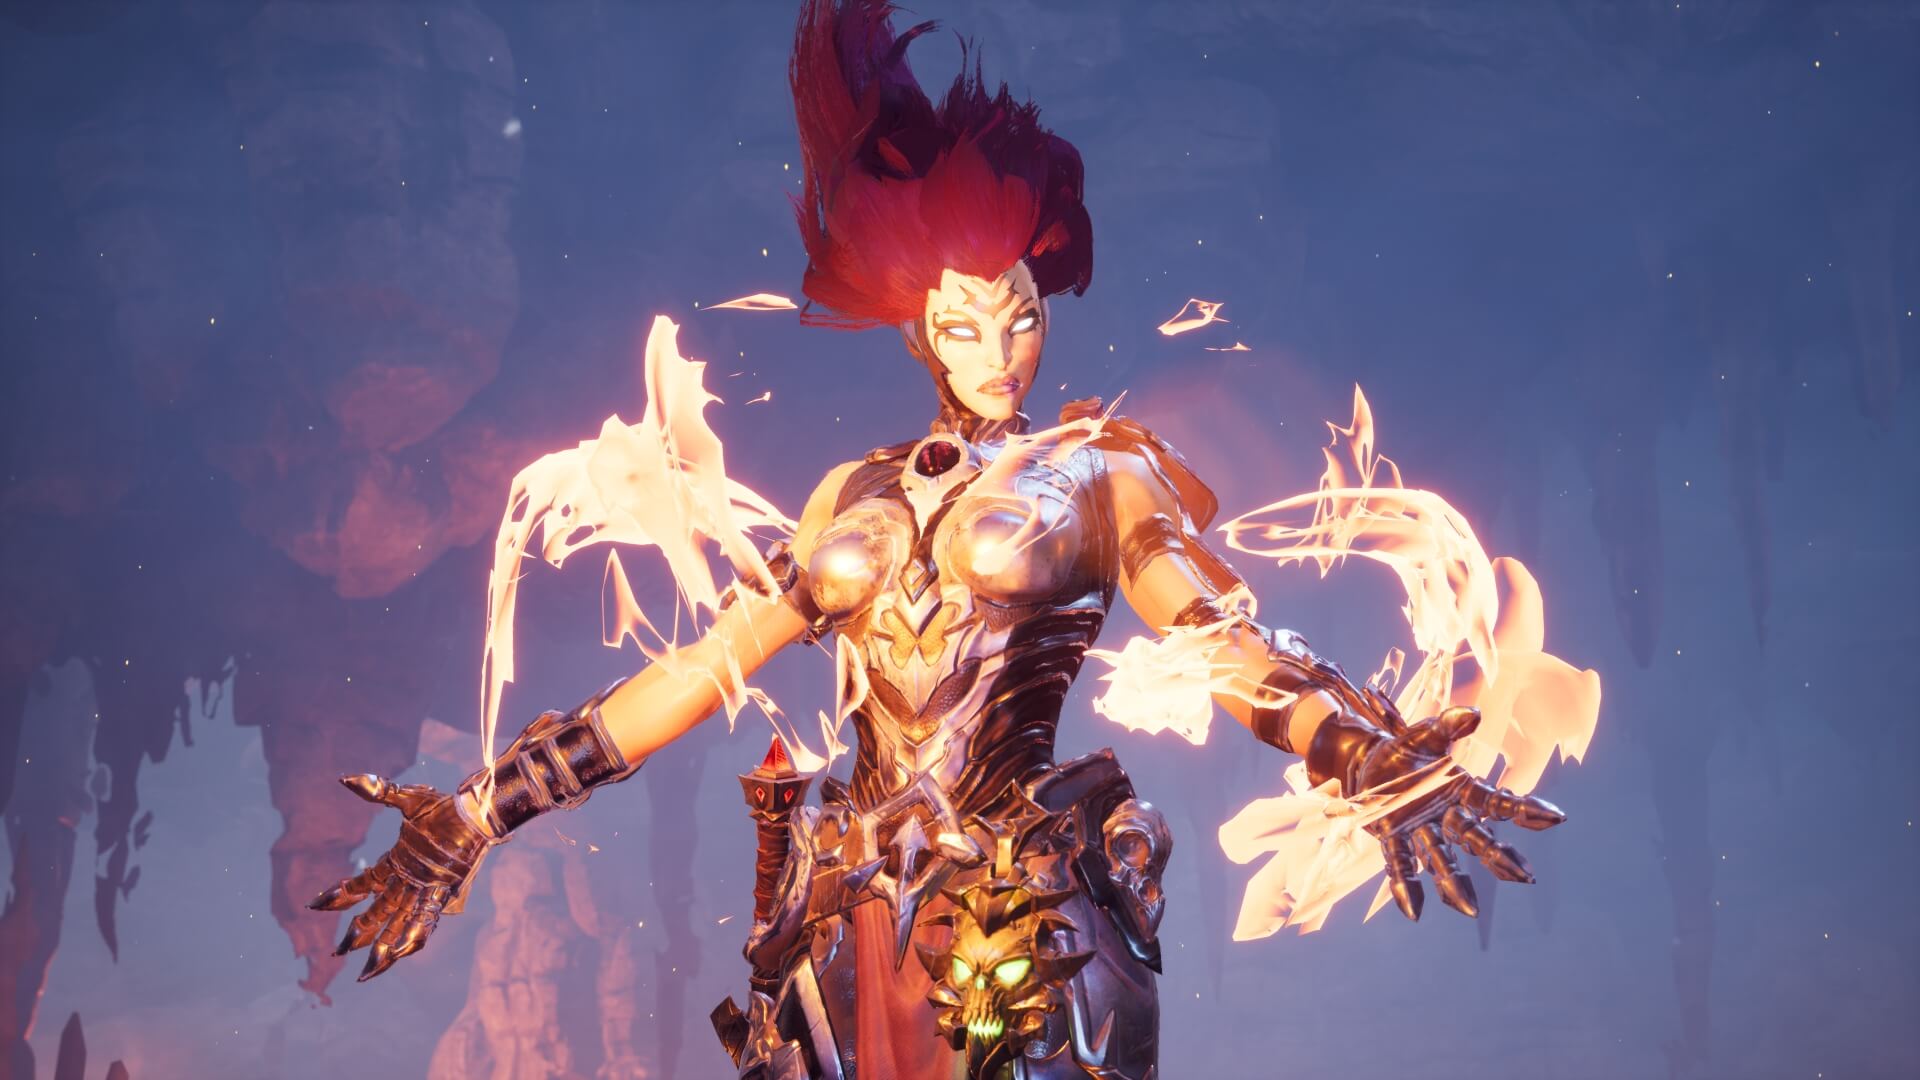 Darksiders III: Film Techniques In Video Game Form